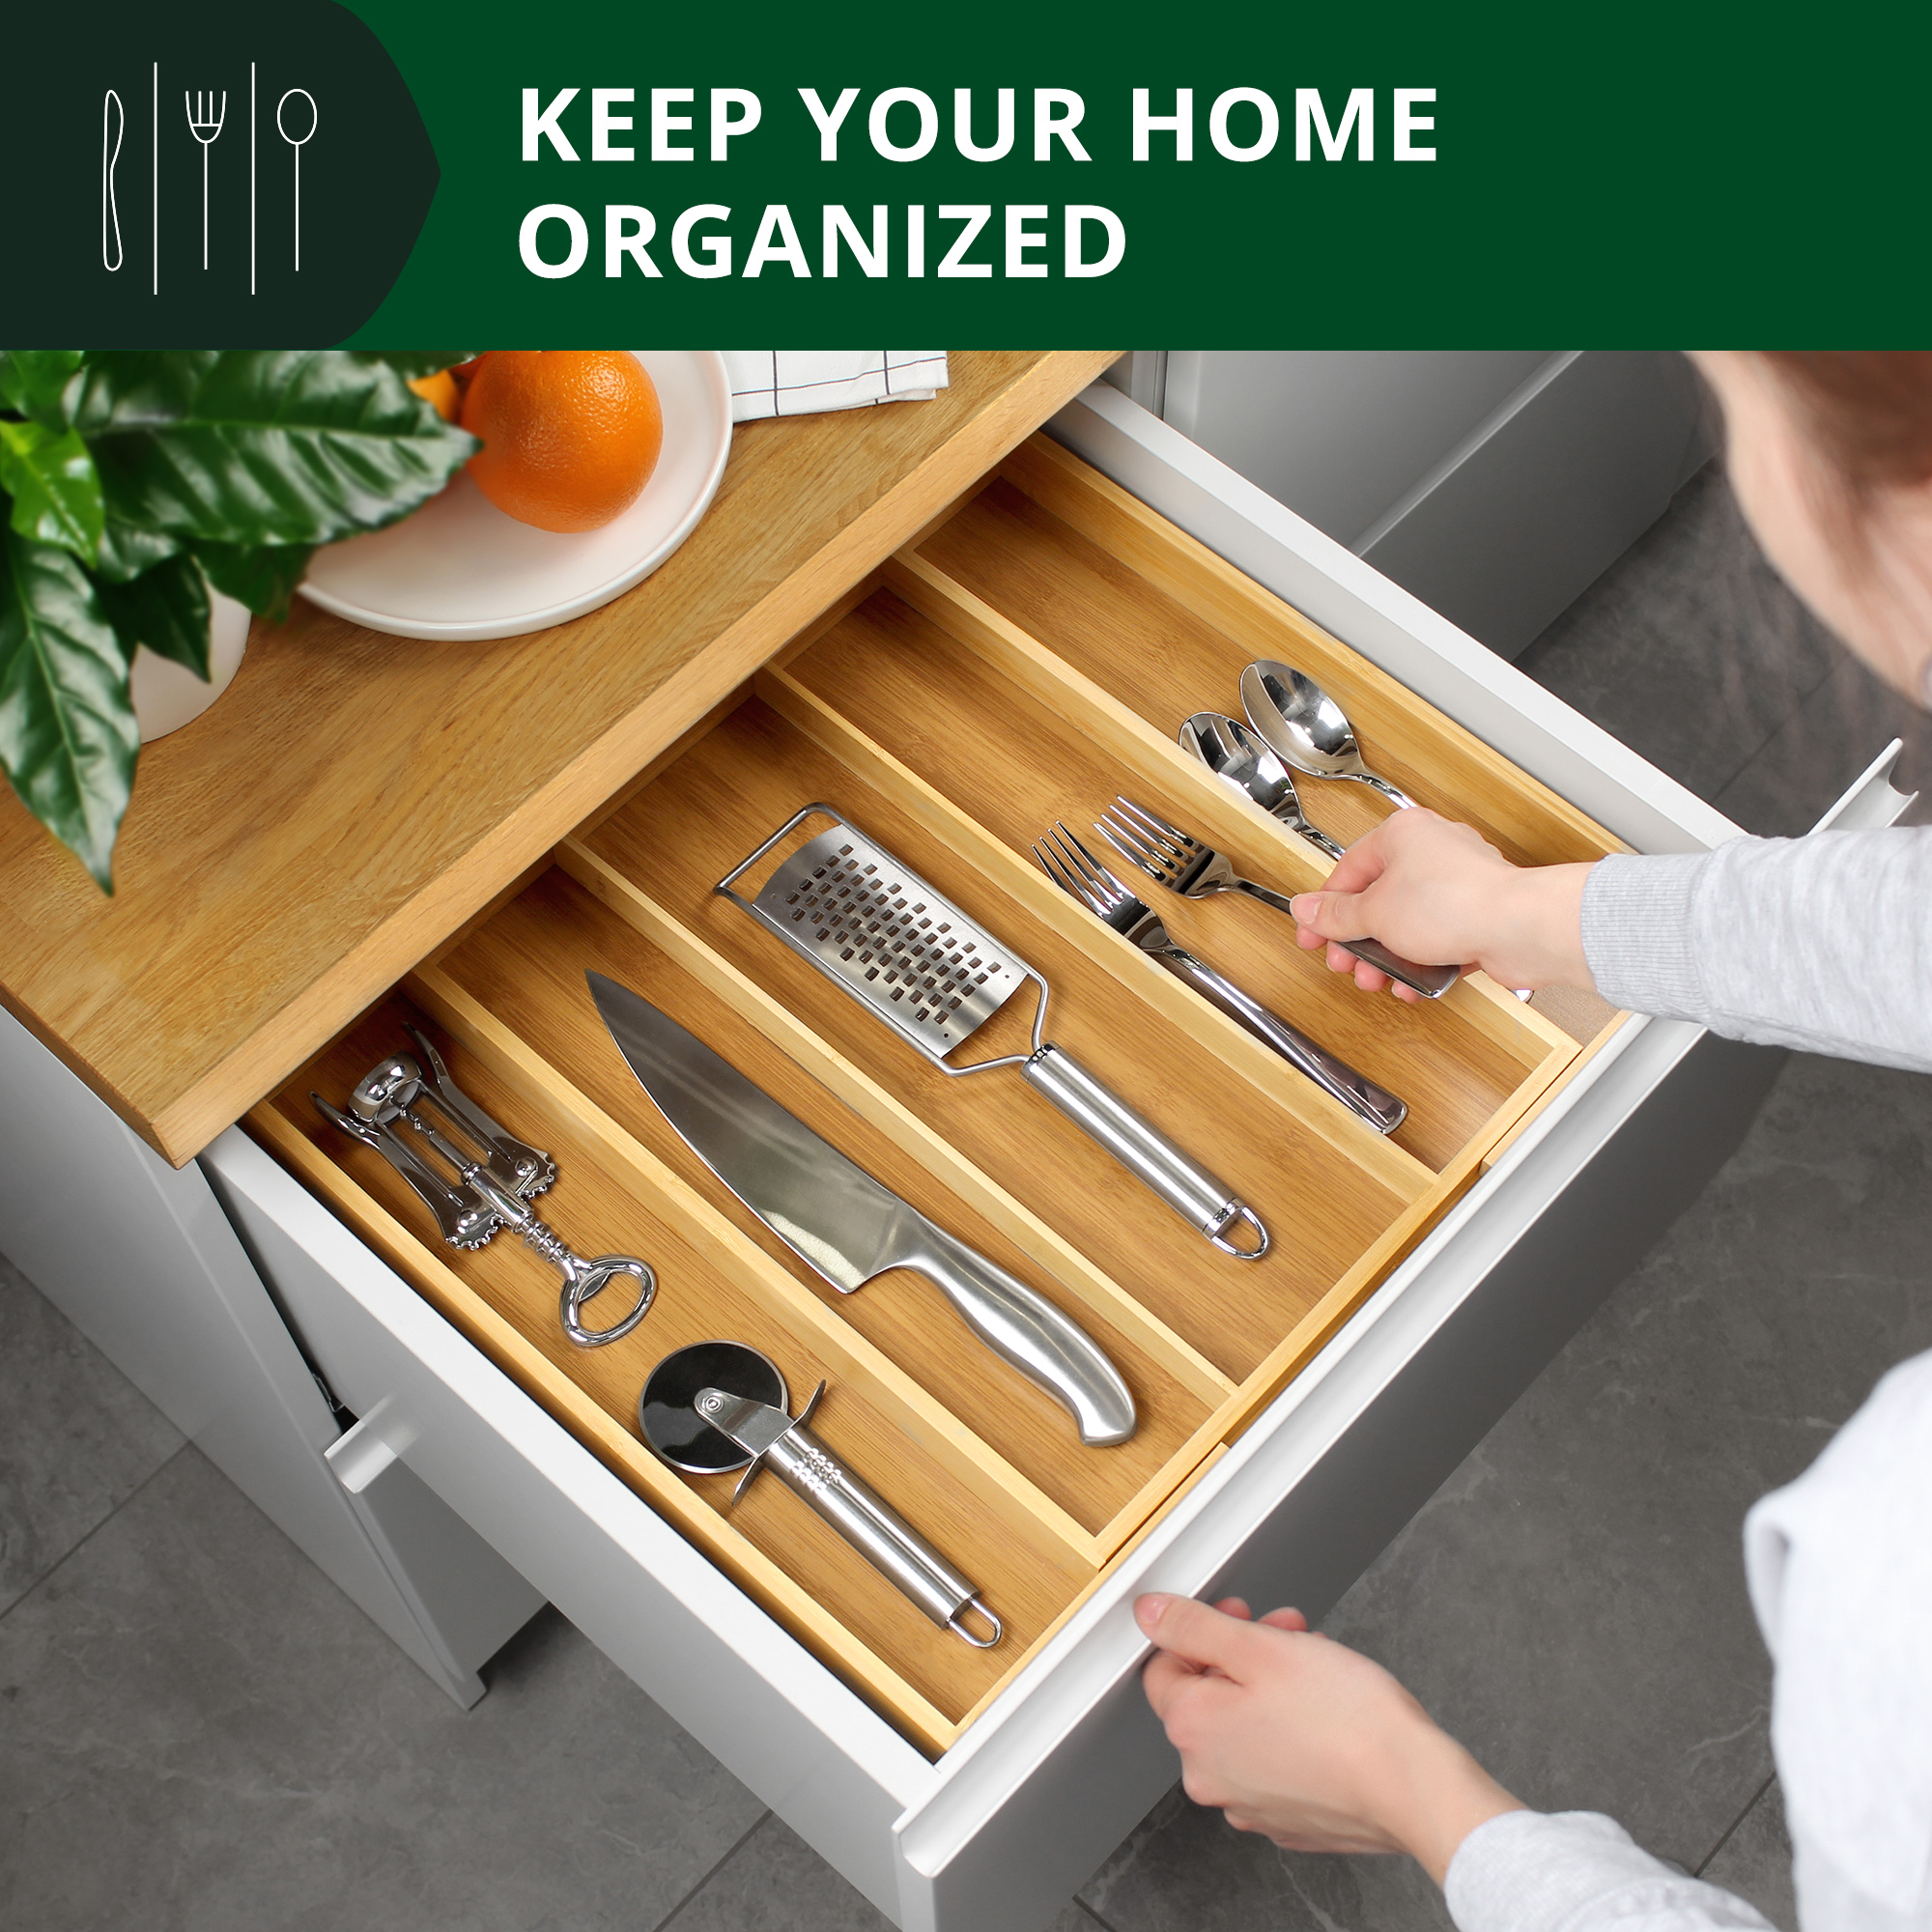 Bamboo Kitchen Drawer Organizer - Expandable Silverware Organizer/Utensil Holder and Cutlery Tray with Grooved Drawer Dividers for Flatware and Kitchen Utensils - image 5 of 9